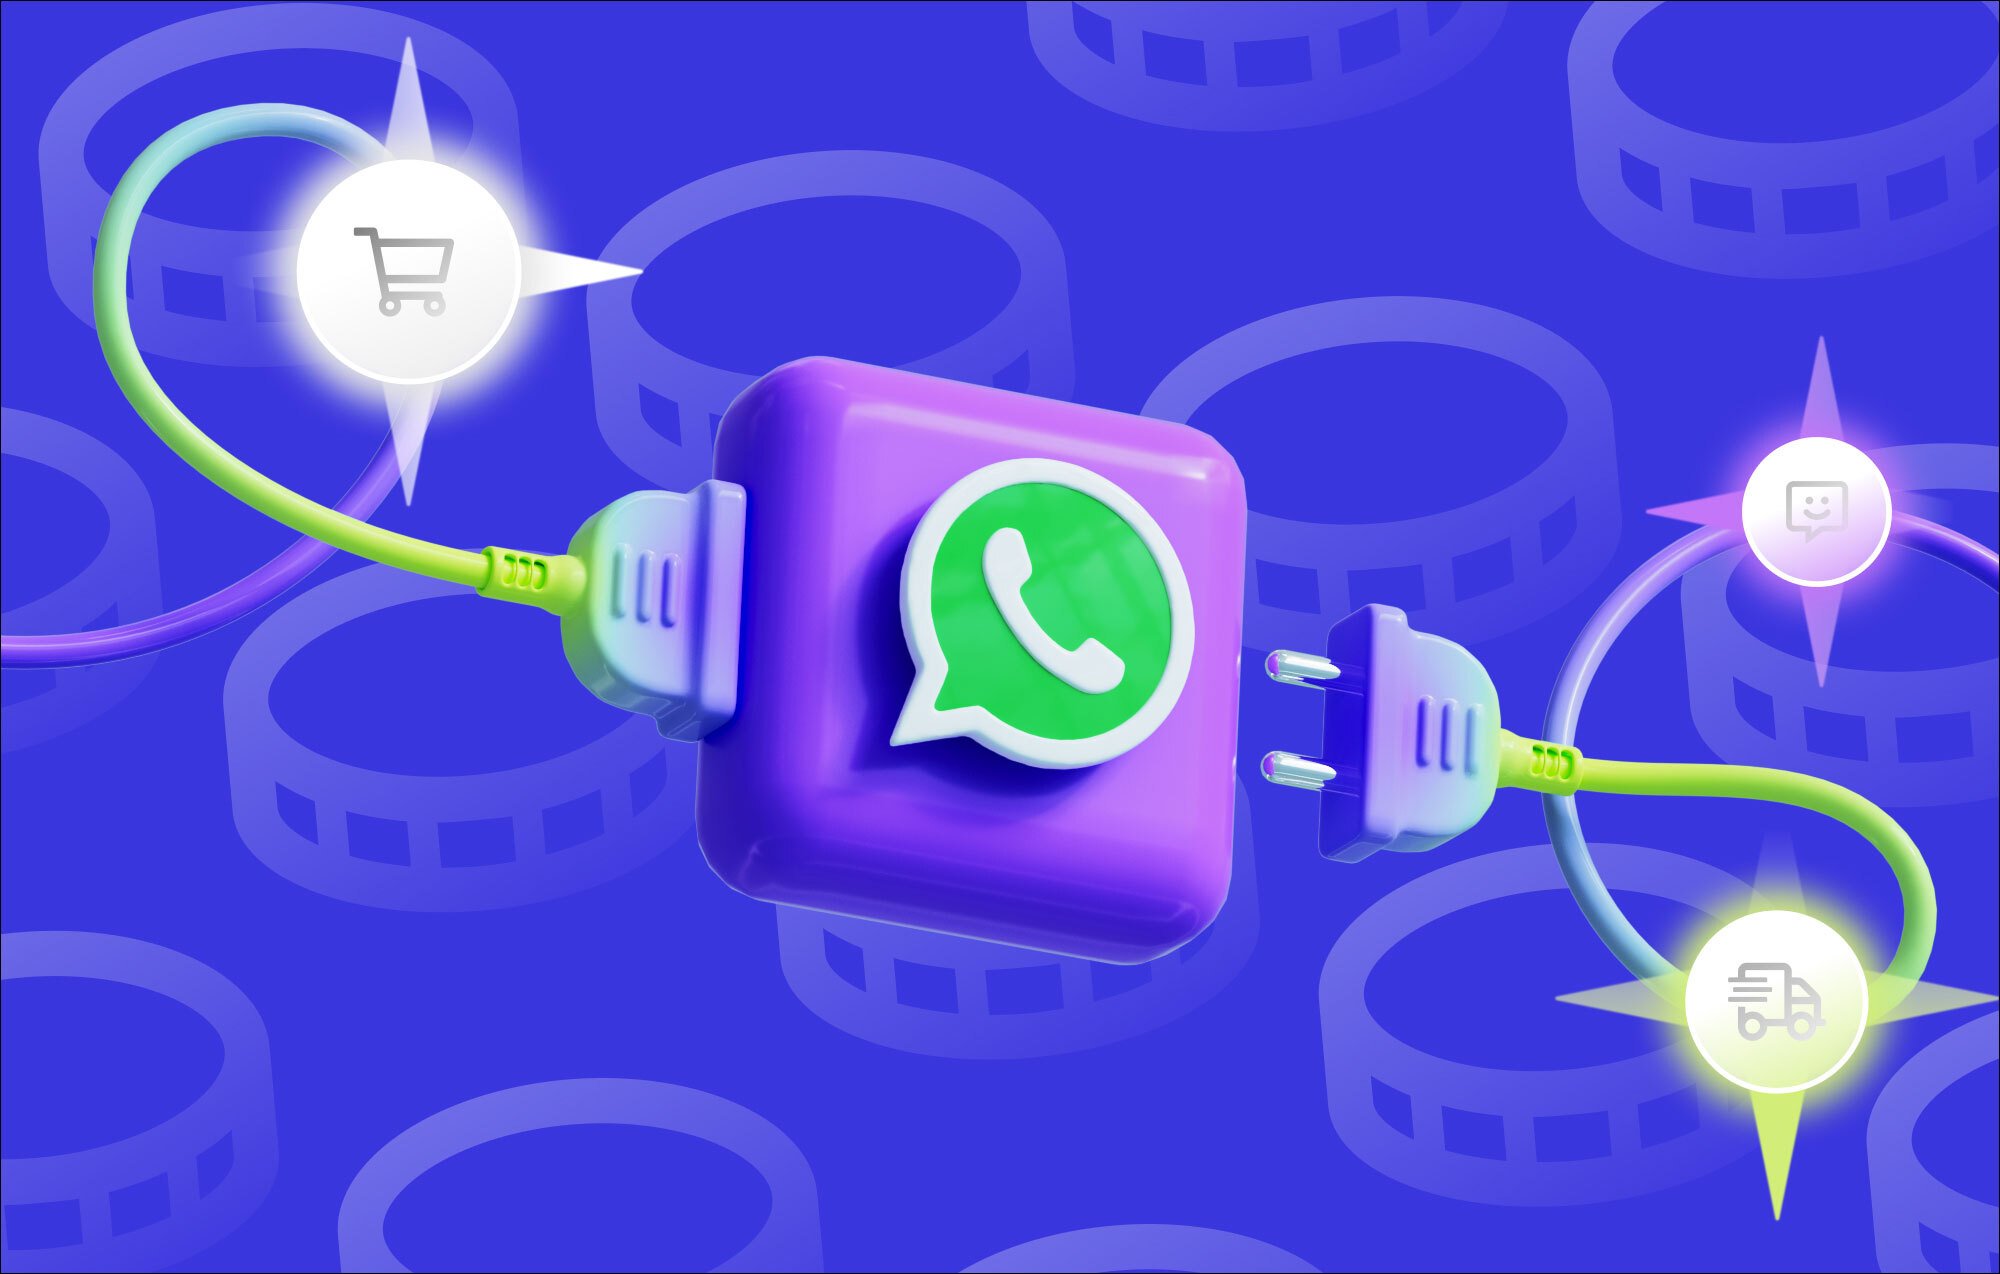 Are you ready for a WhatsApp Business platform?